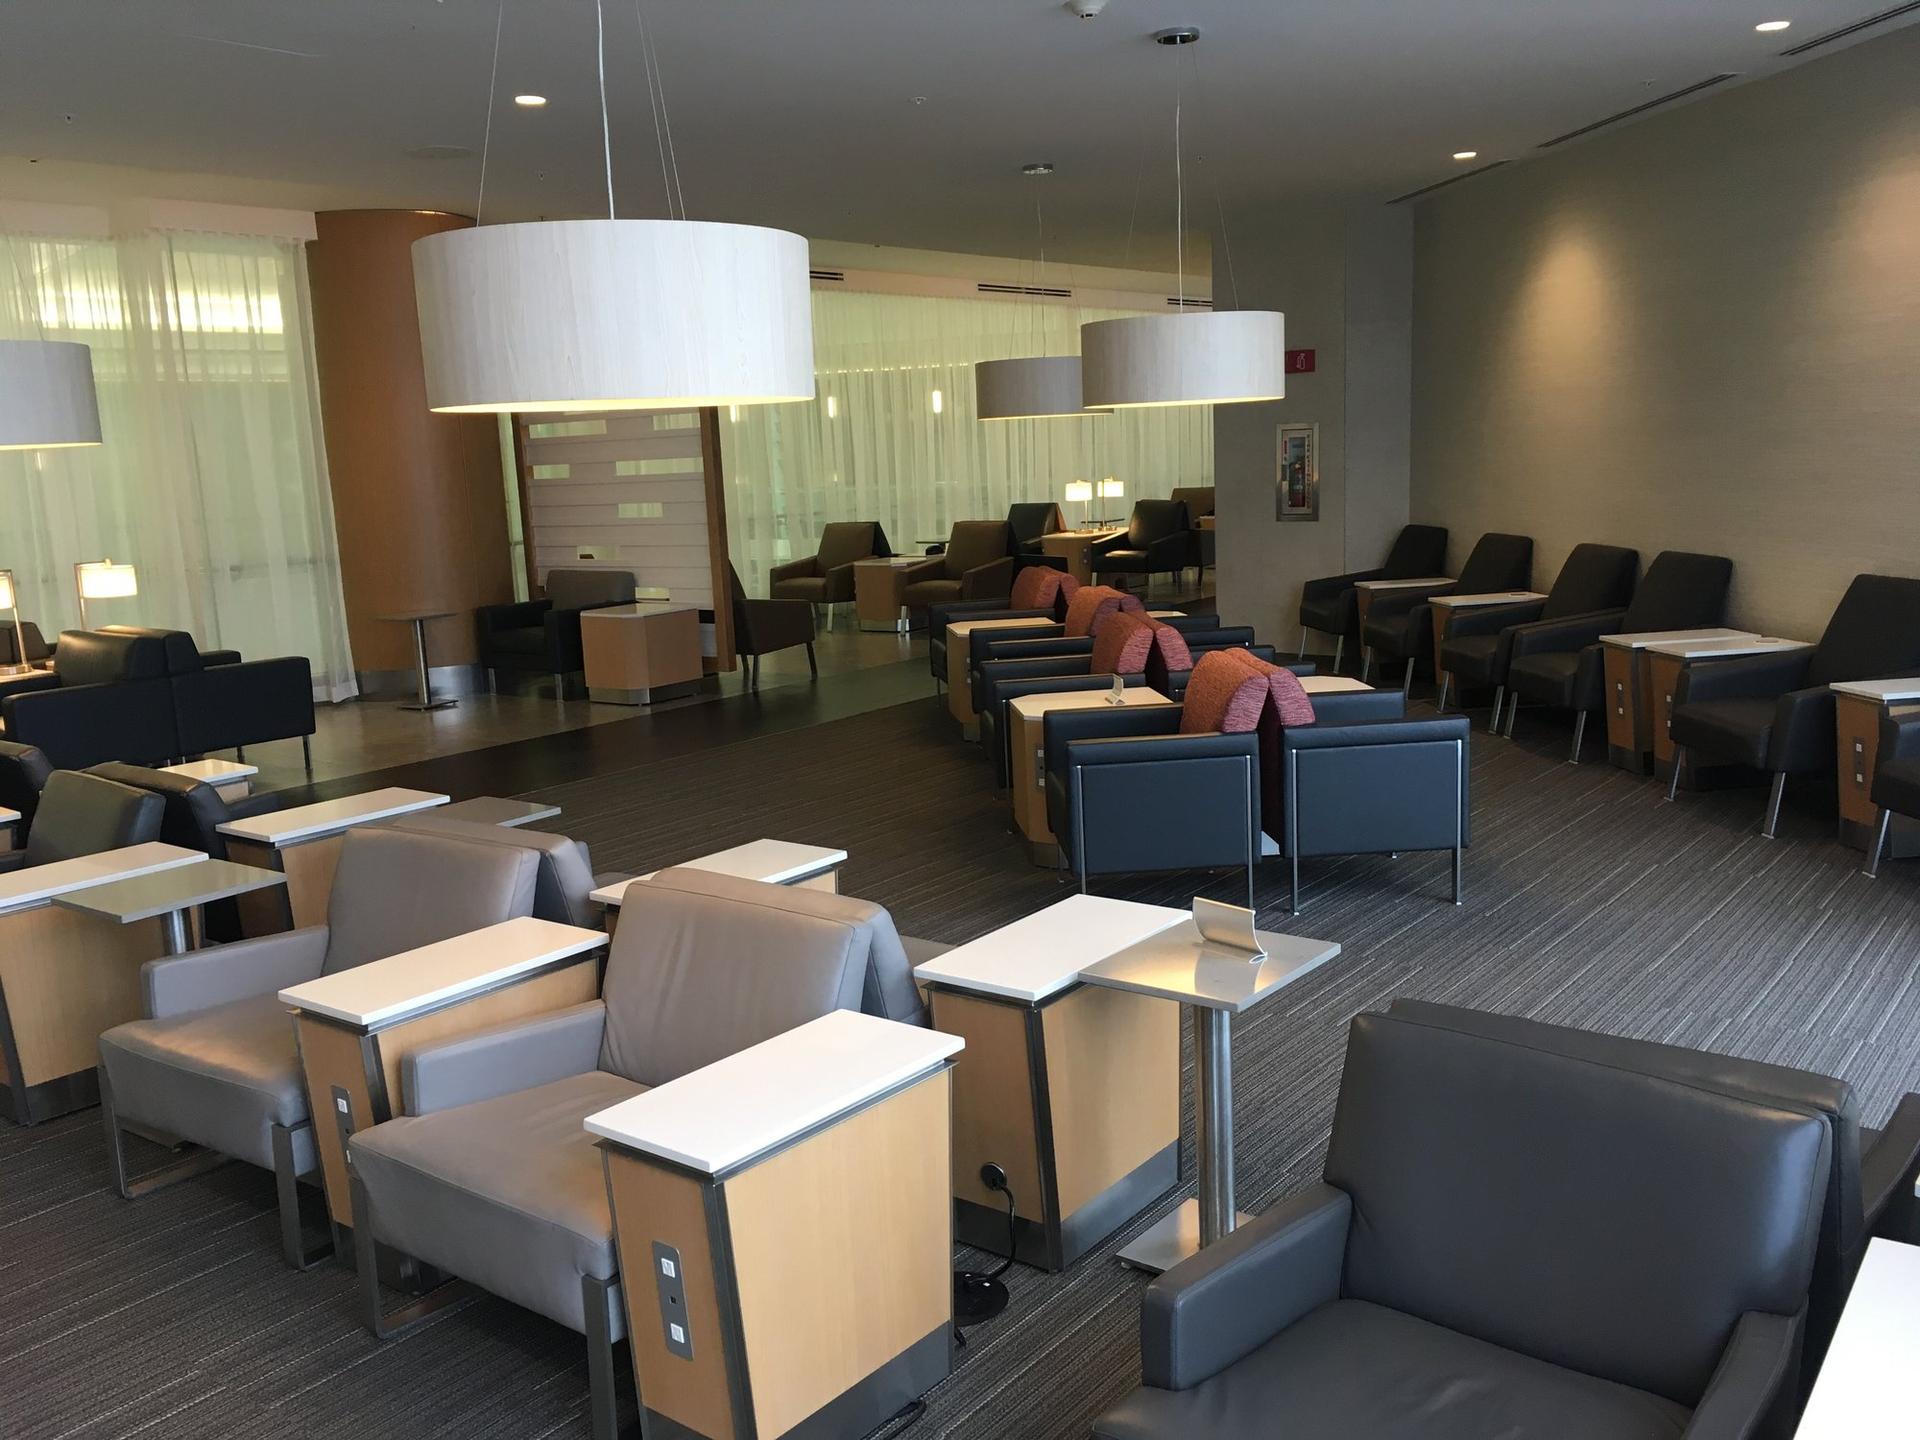 American Airlines Flagship Lounge image 40 of 65